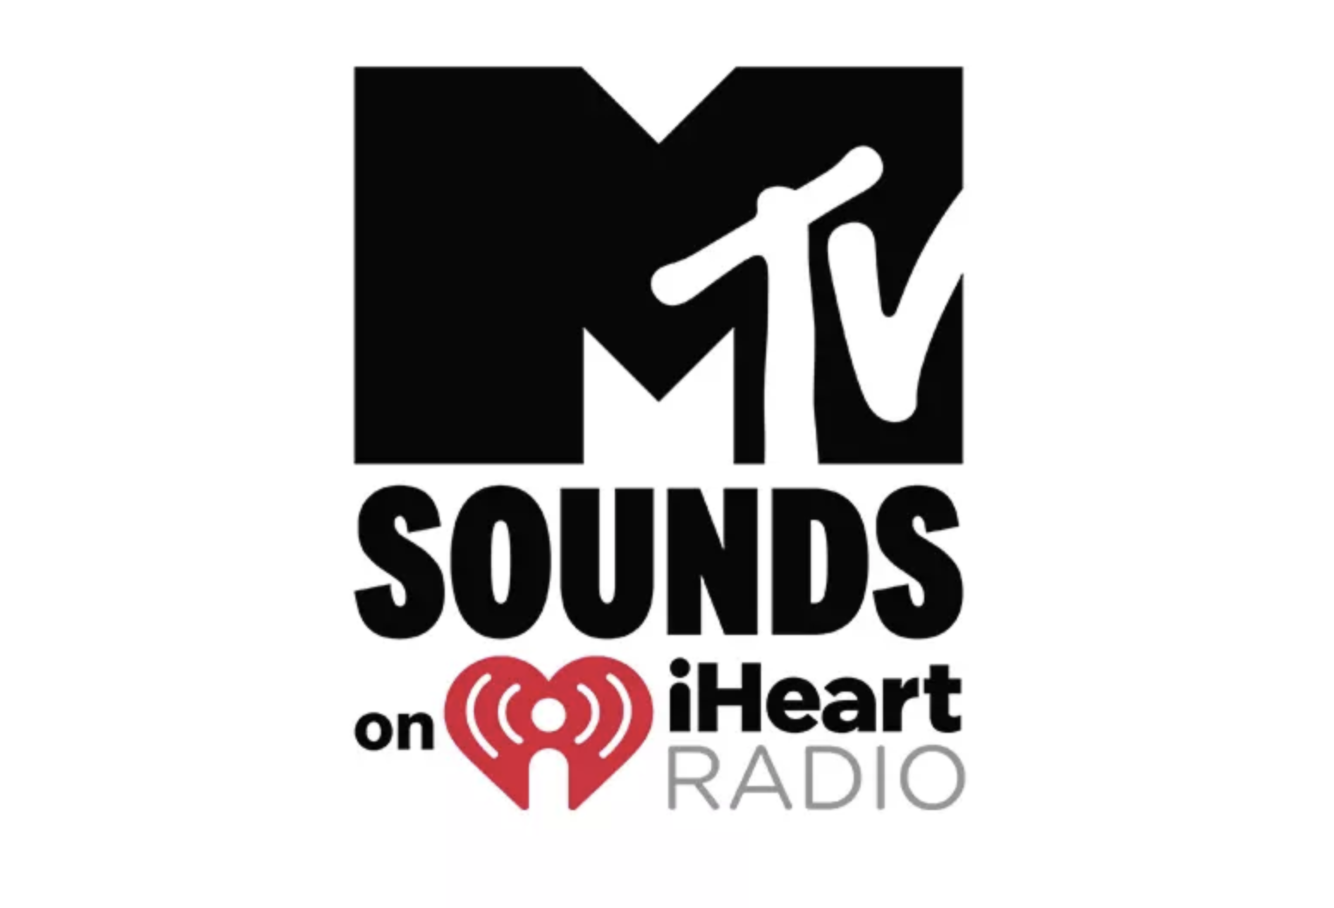 MTV pop-up station launches on iHeartRadio, hosted by Thandi Phoenix and Young Franco